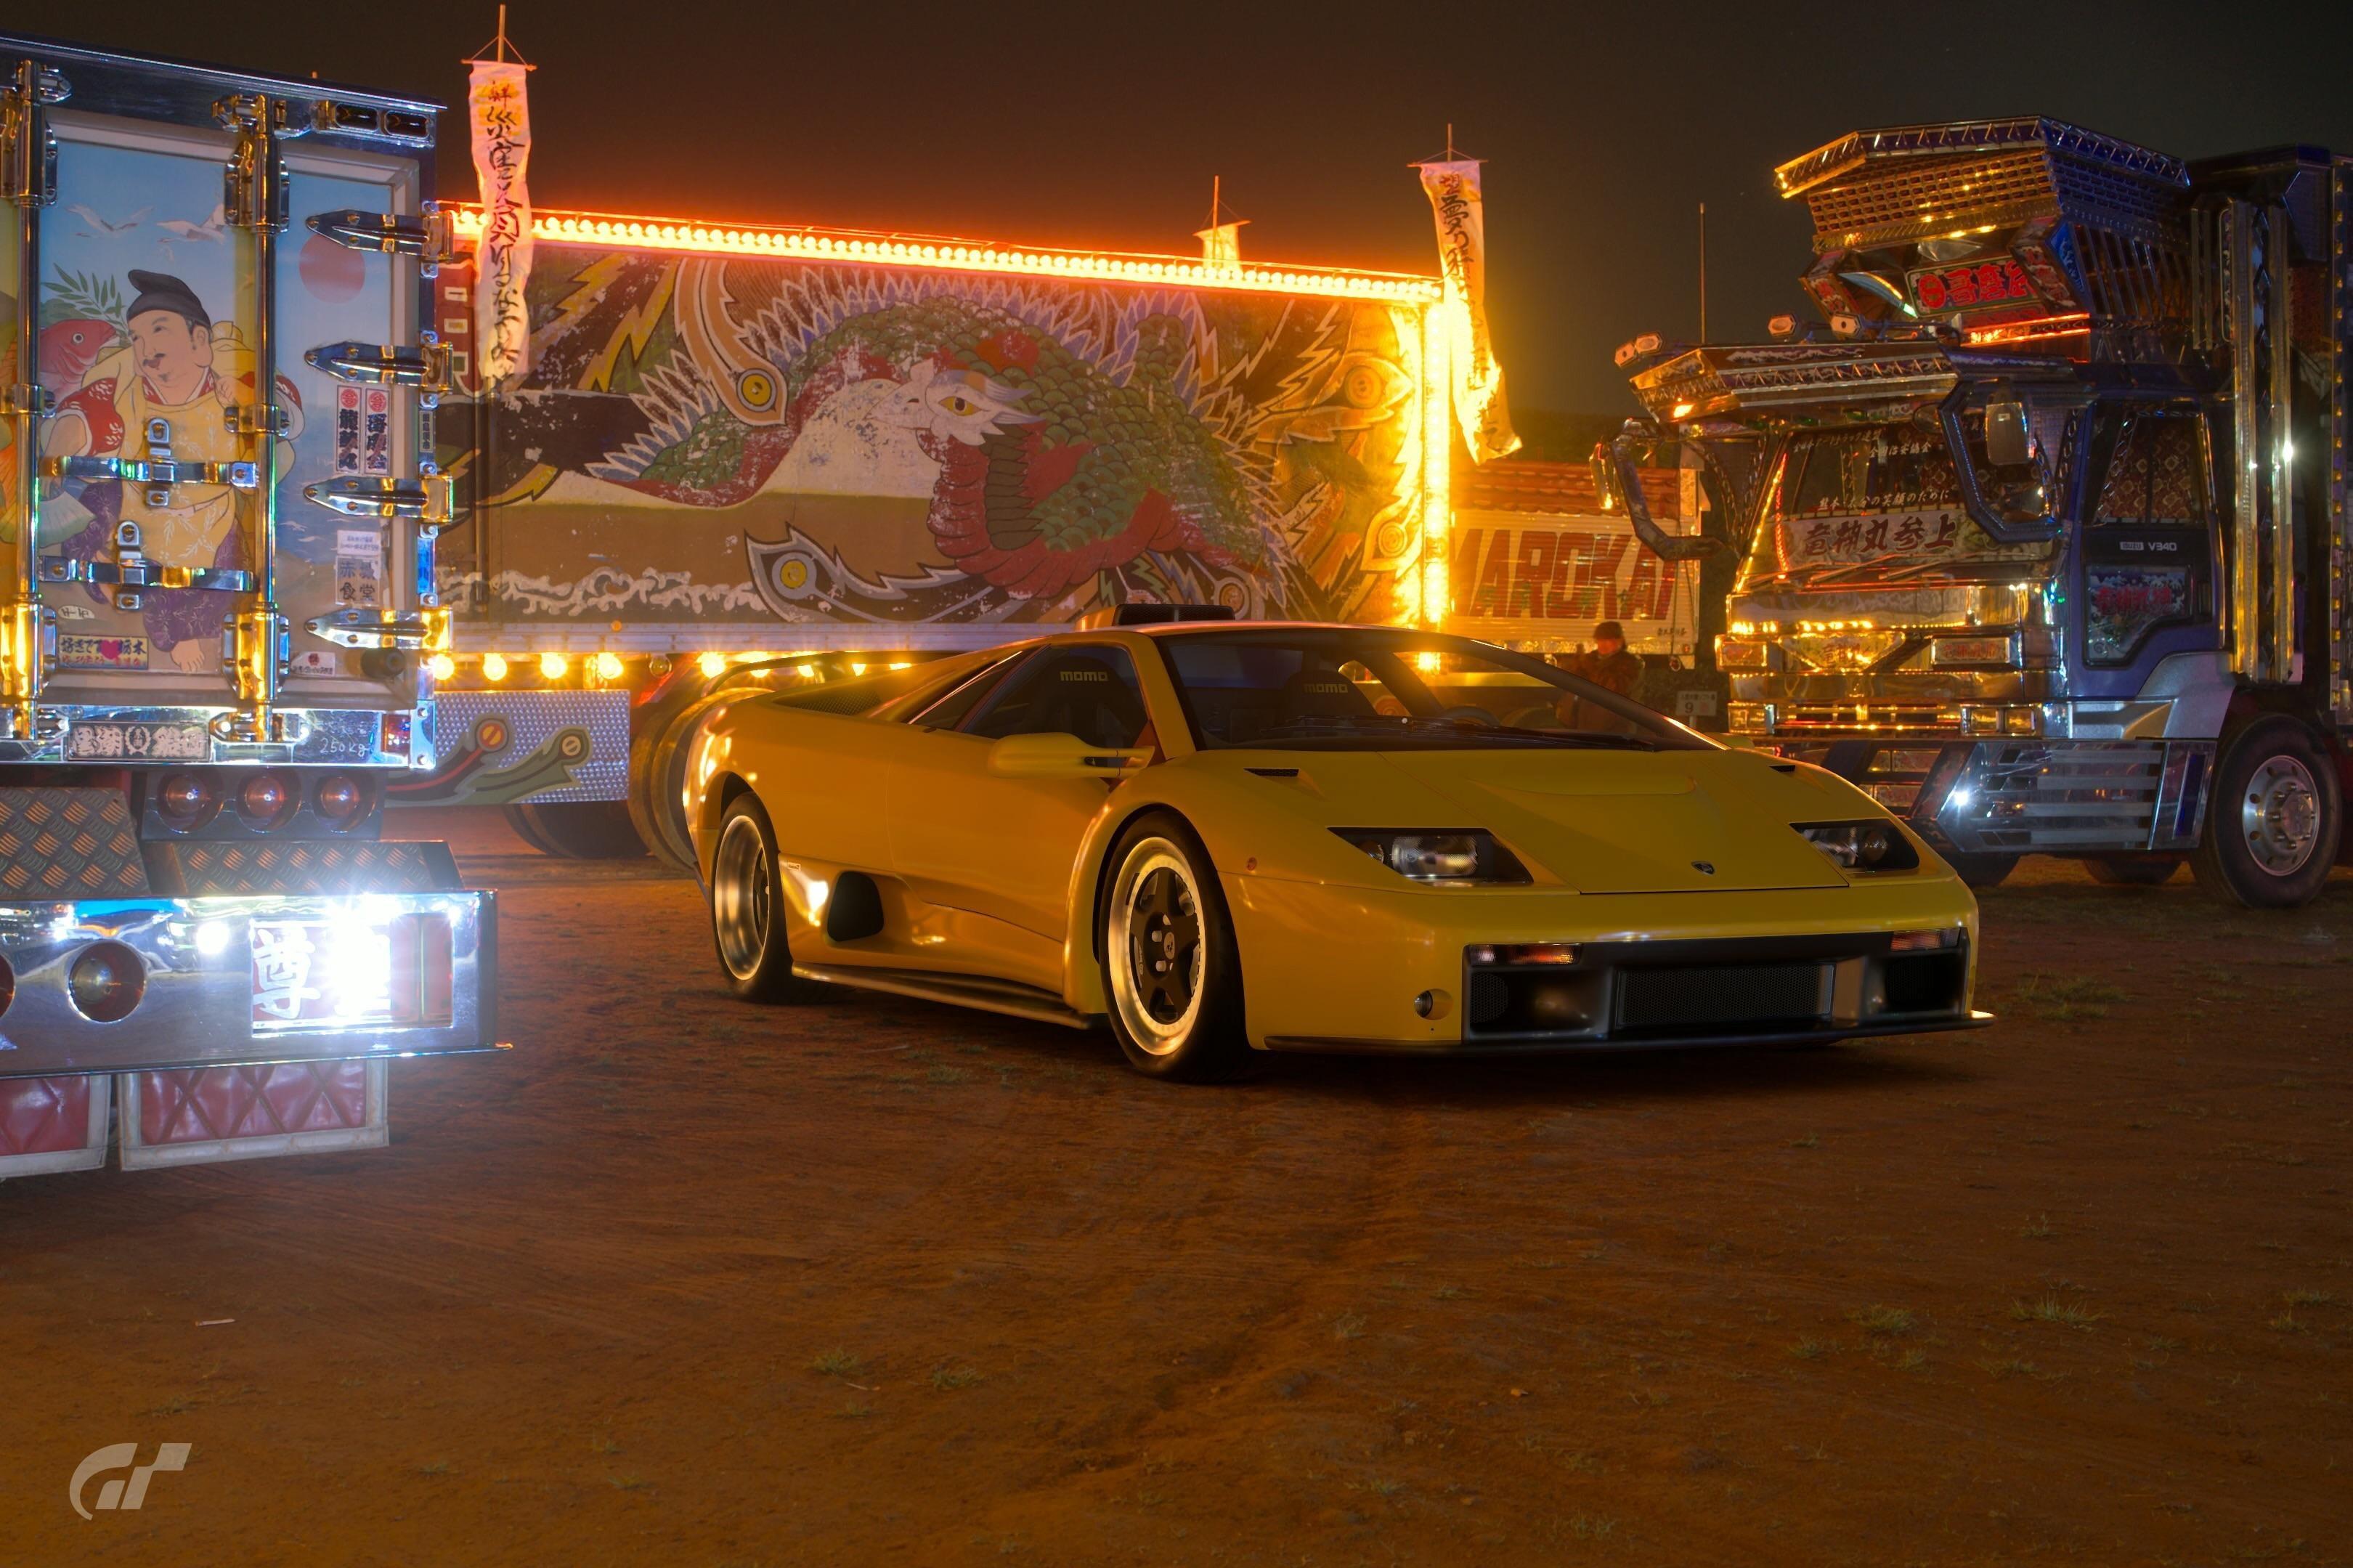 The Lamborghini Diablo Gt Is Undoubtedly One Of Best Supercars